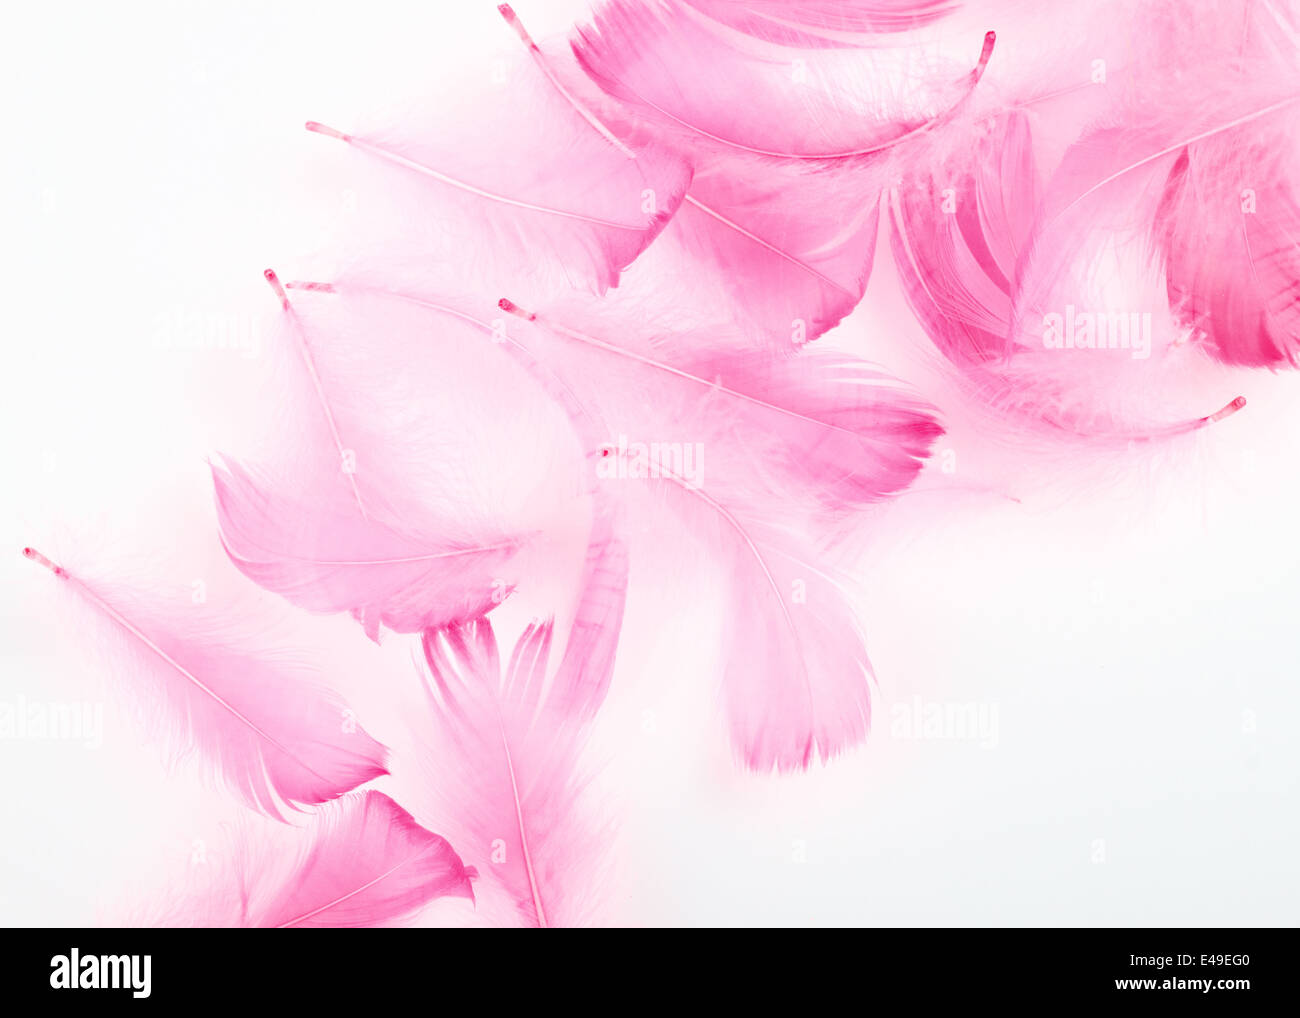 Premium Photo  Fluffy pink feathers background texture